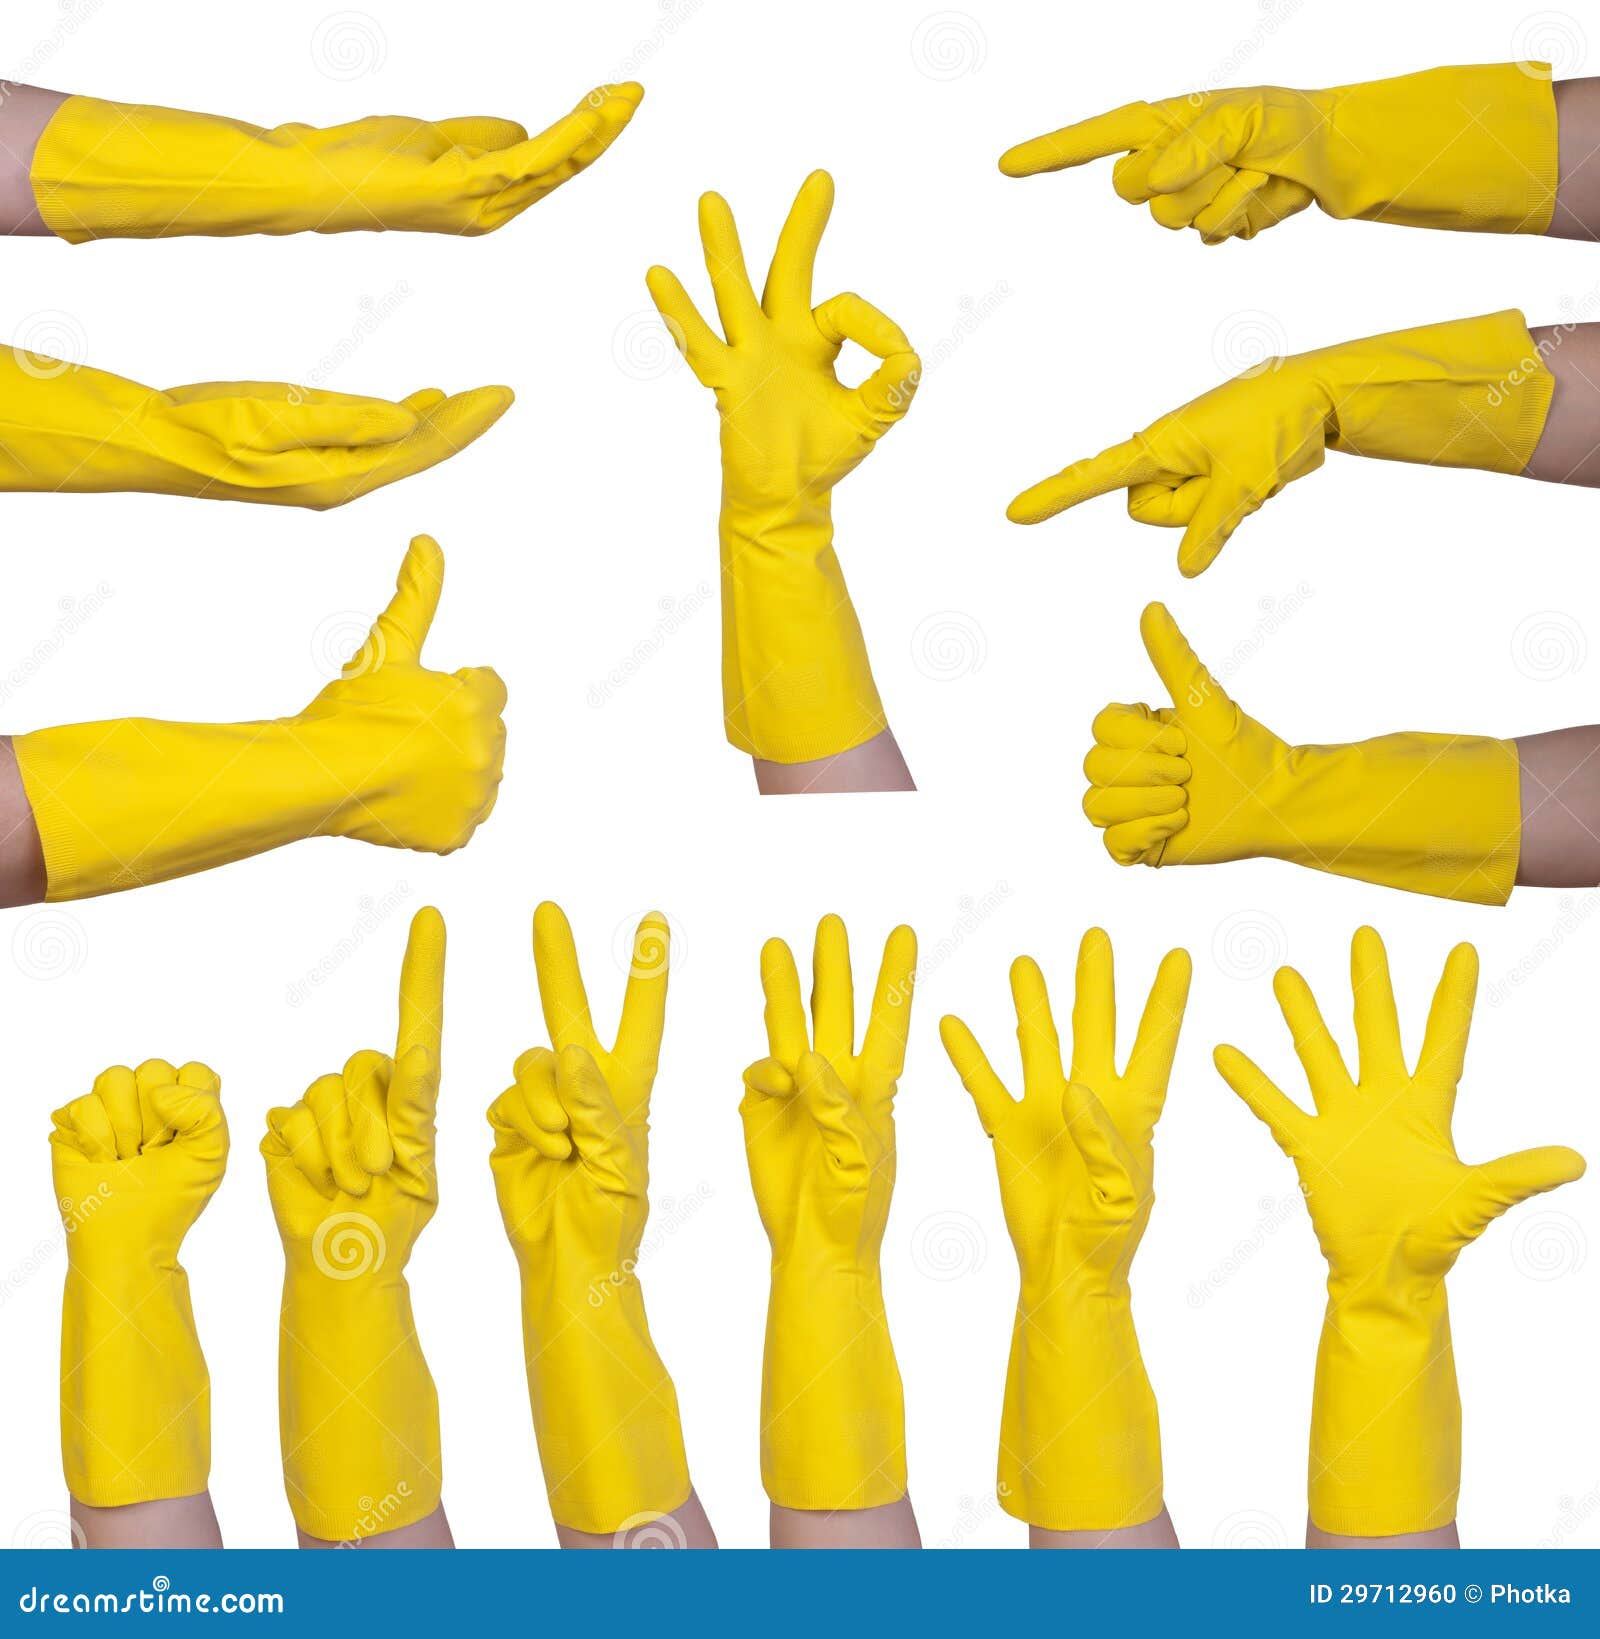 yellow gloves clipart - photo #10